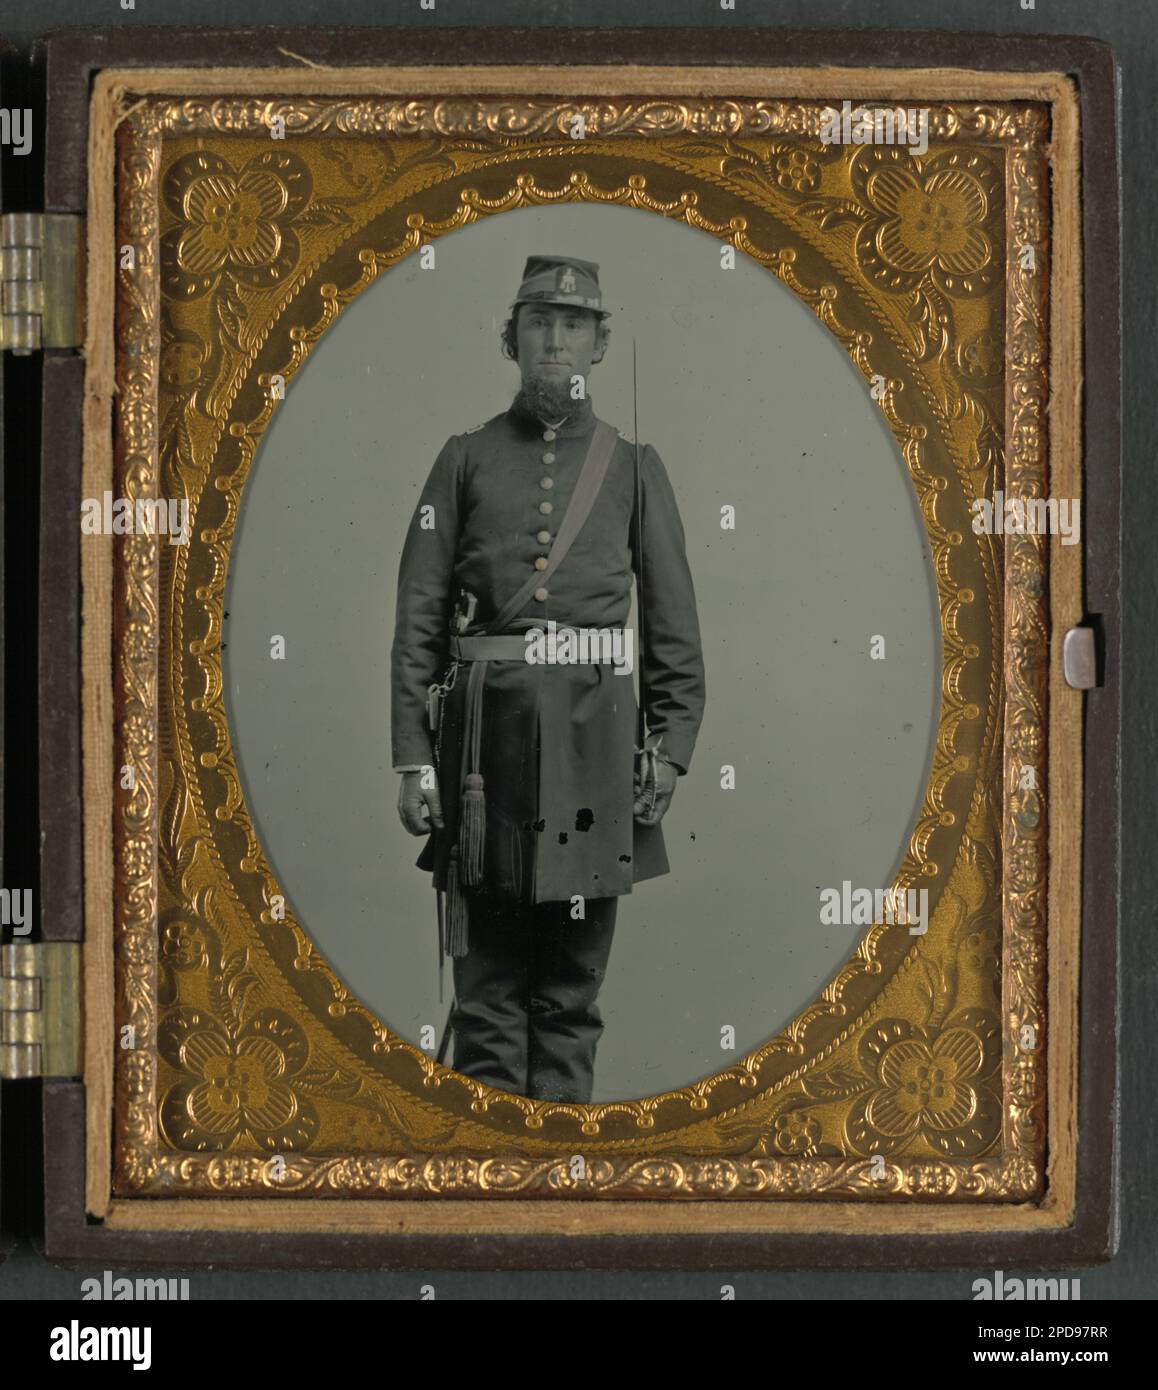 Colonel Joseph Walker of Co. K, 5th South Carolina Infantry Regiment, and Field and Staff, Palmetto South Carolina Sharpshooters Regiment, in uniform, two-piece belt buckle with palmetto, and sash over shoulder for officer of the day, with eagle head sword. Liljenquist Family Collection of Civil War Photographs , FAmbrotype/Tintype photograph filing series , pp/liljconfed. Walker, Joseph, 1835-1902, Confederate States of America, Army, South Carolina Infantry Regiment, 5th, People, 1860-1870, Soldiers, Confederate, 1860-1870, Military uniforms, Confederate, 1860-1870, Daggers & swords, 1860-18 Stock Photo